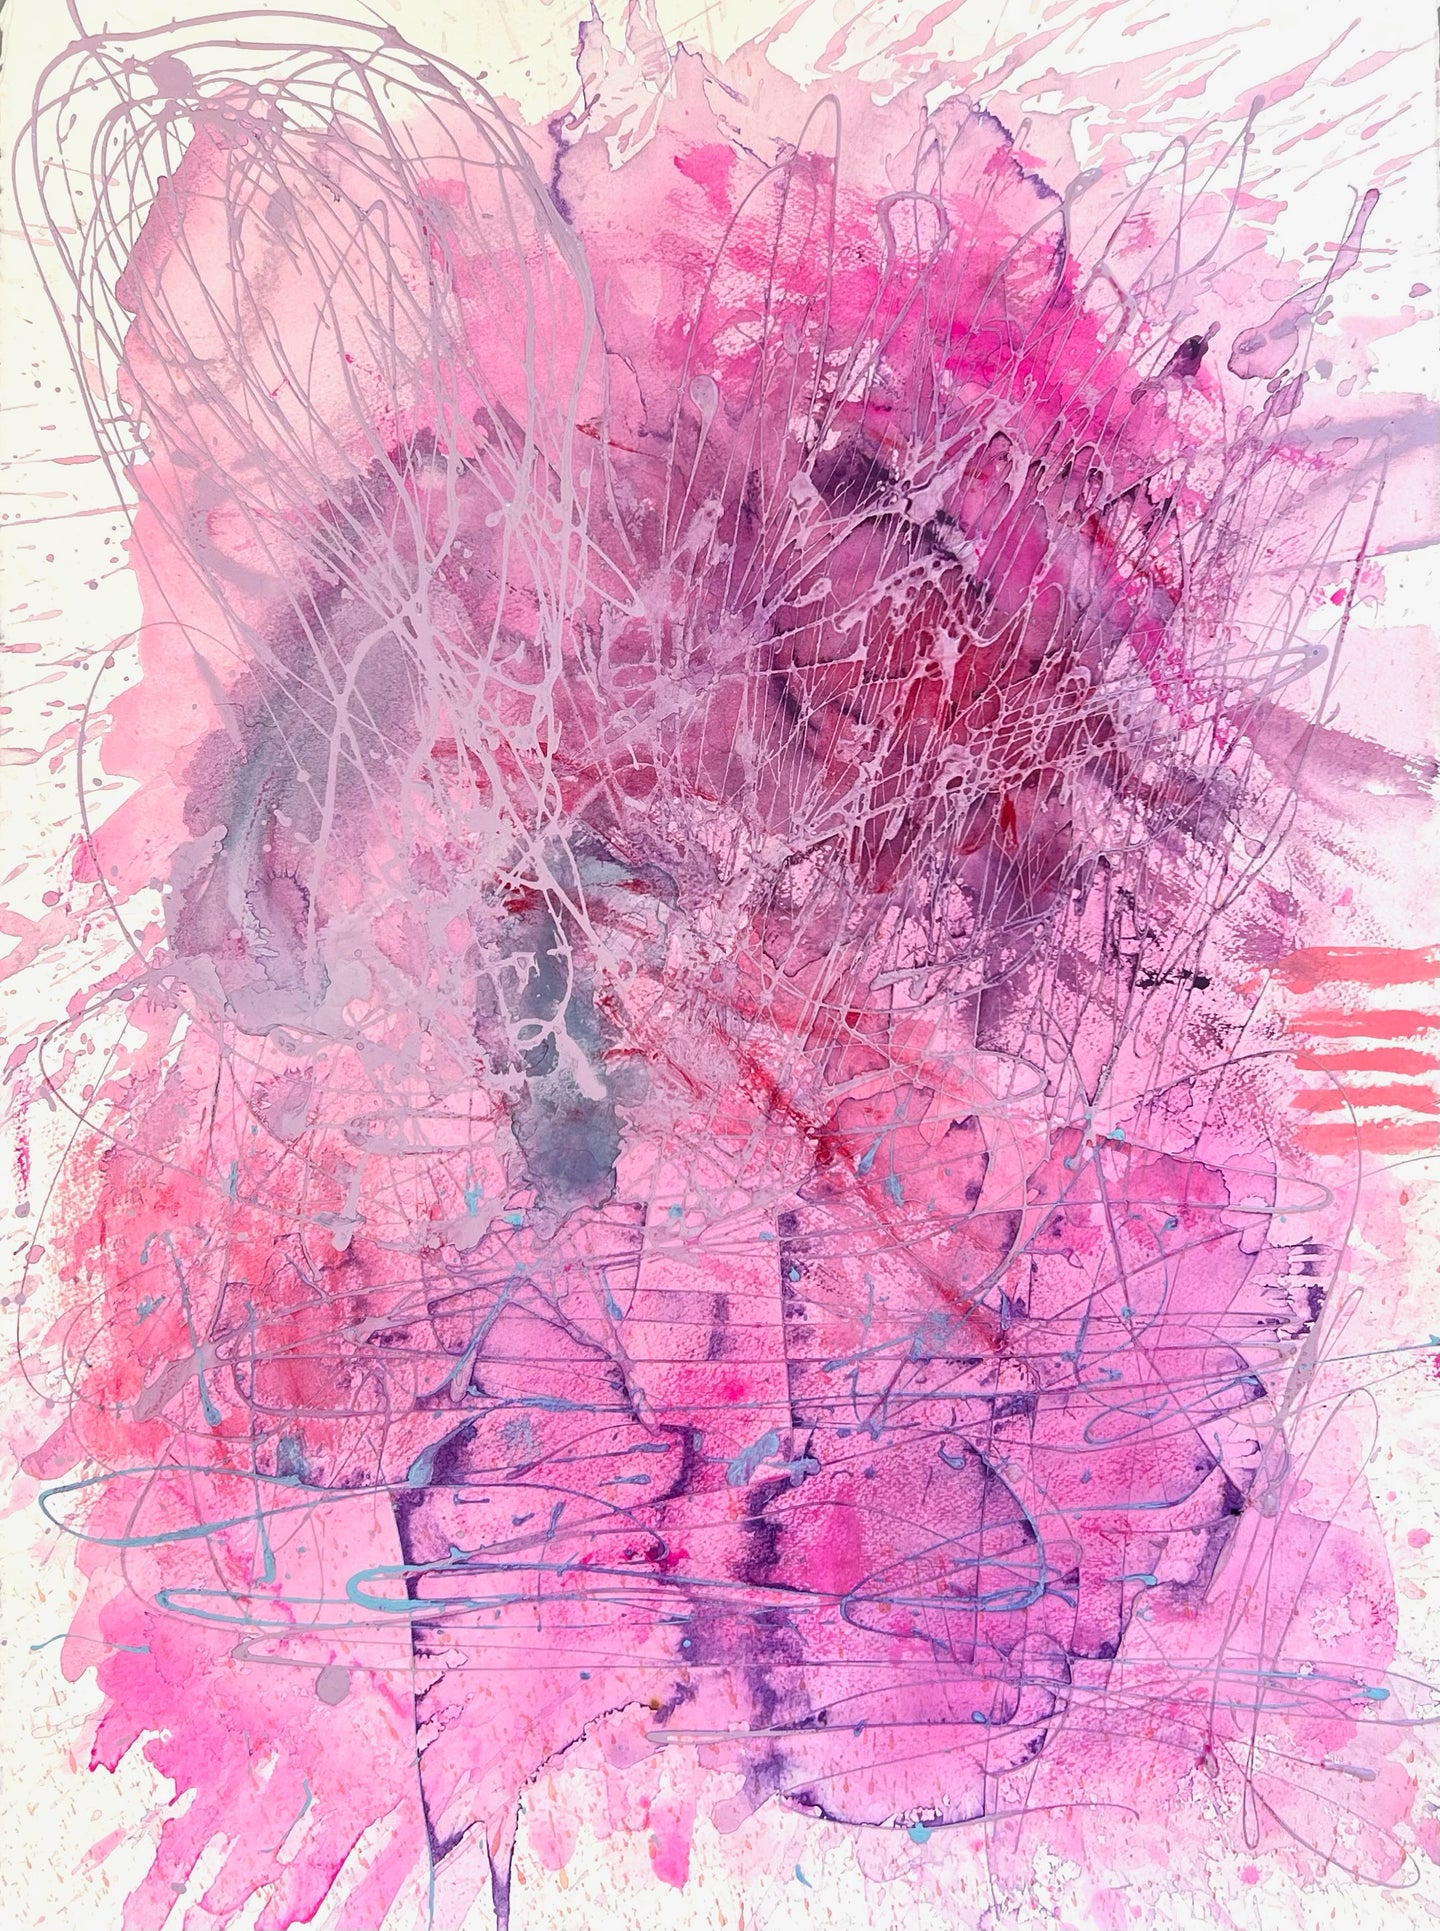 Abstract Expressionist artist J. Steven Manolis', Santa Catalina Sunset 6, pink and purples abstract wall art on paper, 2023, Acrylic on paper, 30 x 22.5 inches